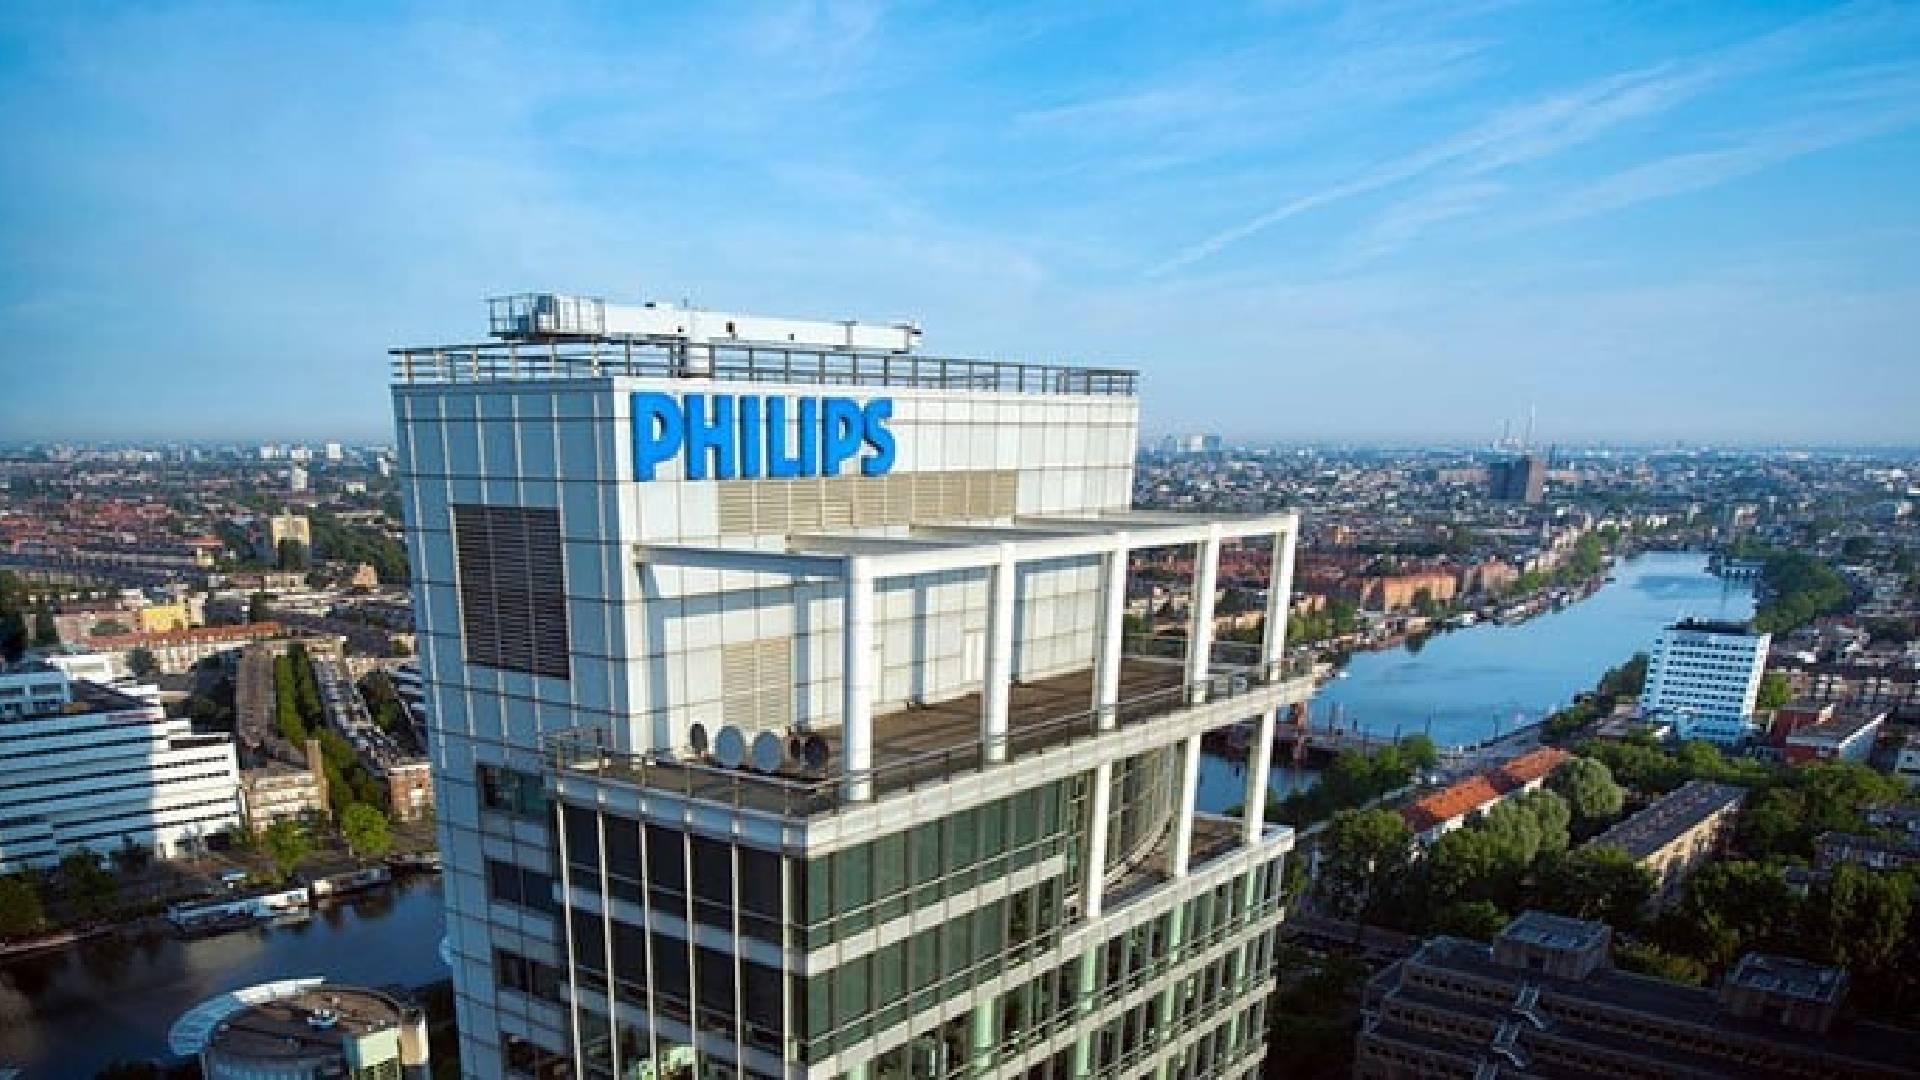 Philips provides update on composition of its Supervisory Board